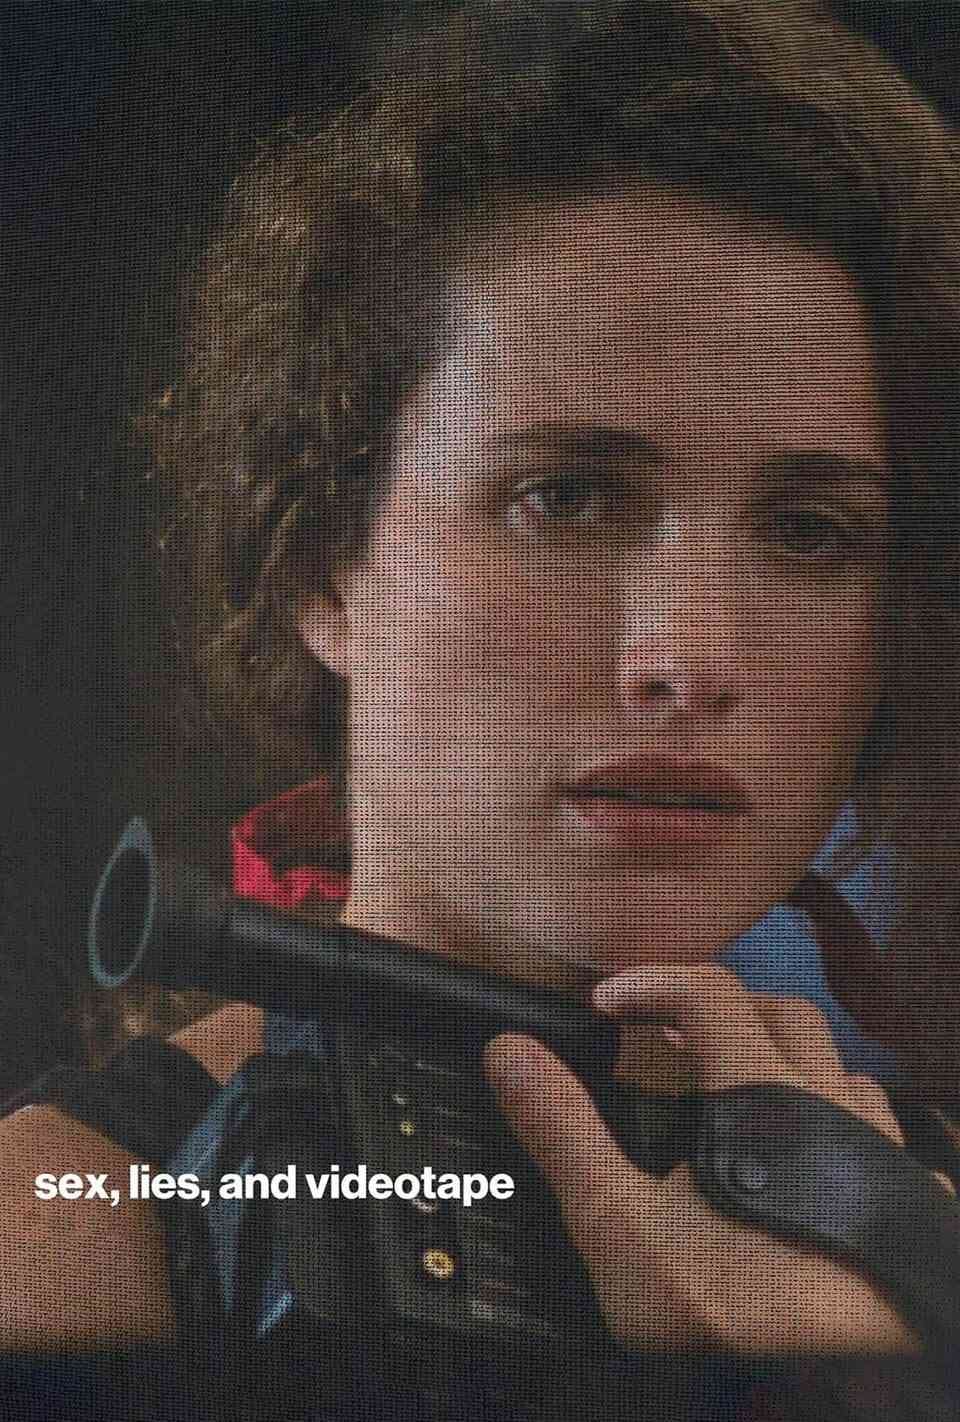 Read Sex, Lies, and Videotape screenplay (poster)